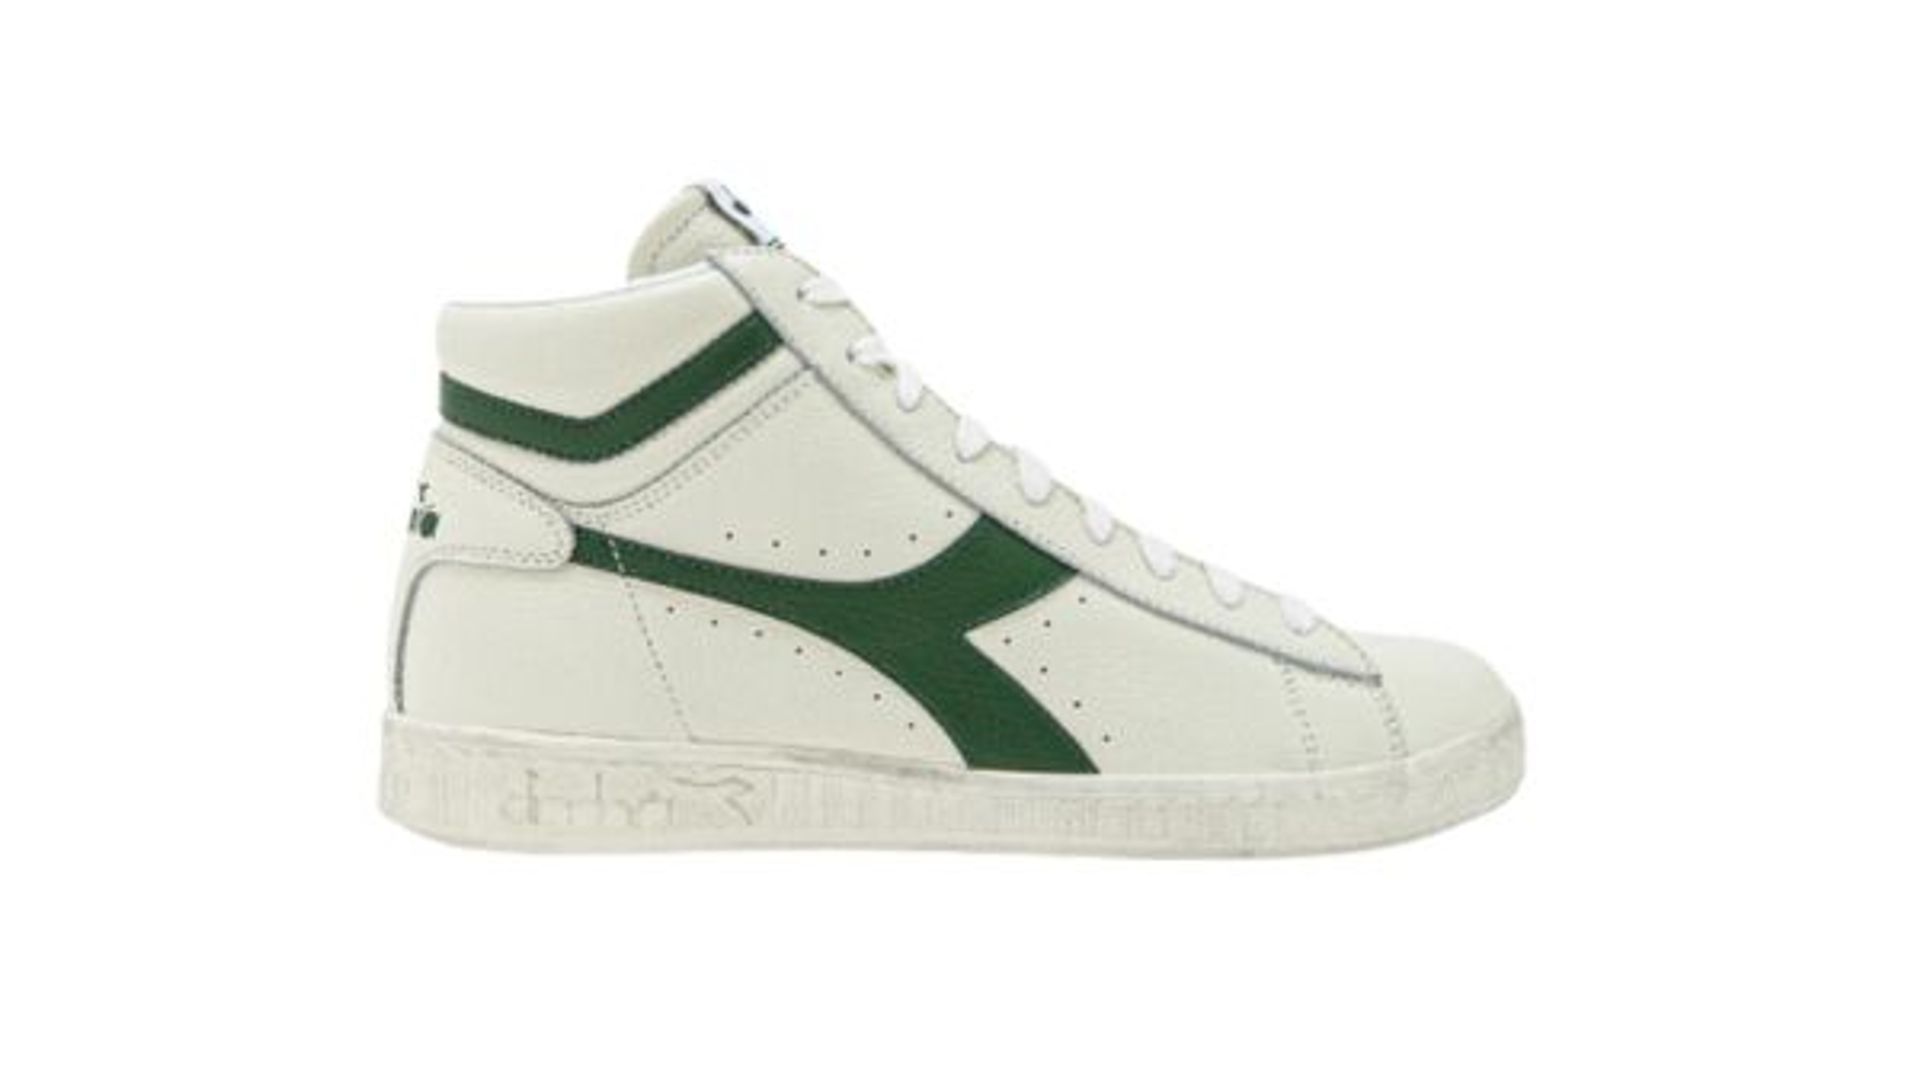 GAME L HIGH WAXED Sporty Sneakers 